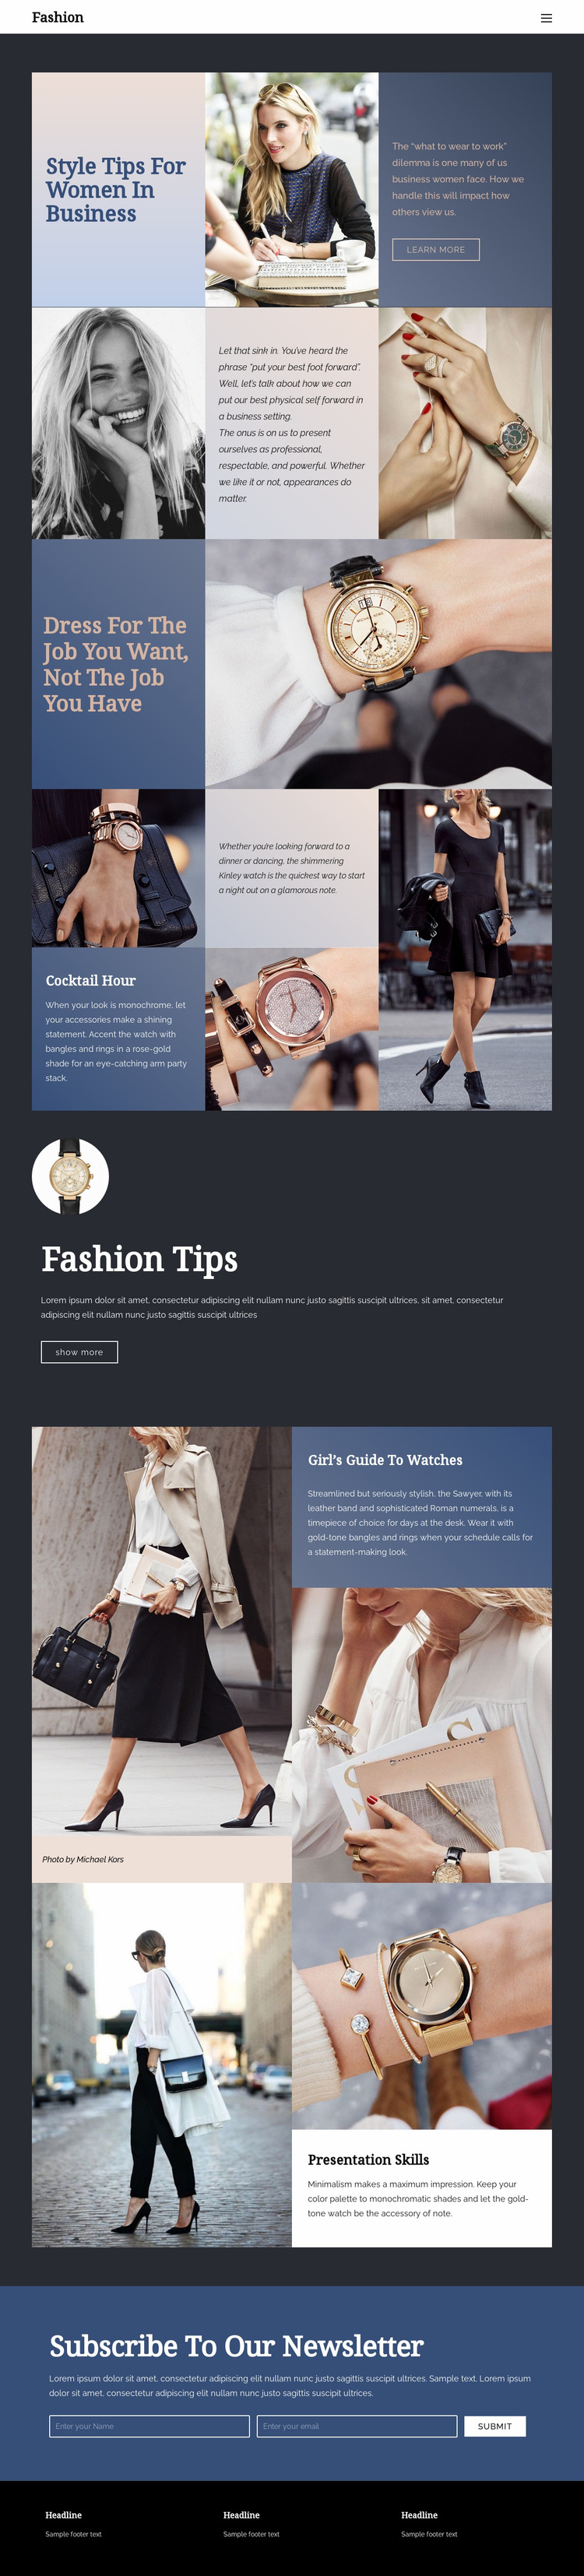 Tips to succeed in fashion Web Page Design